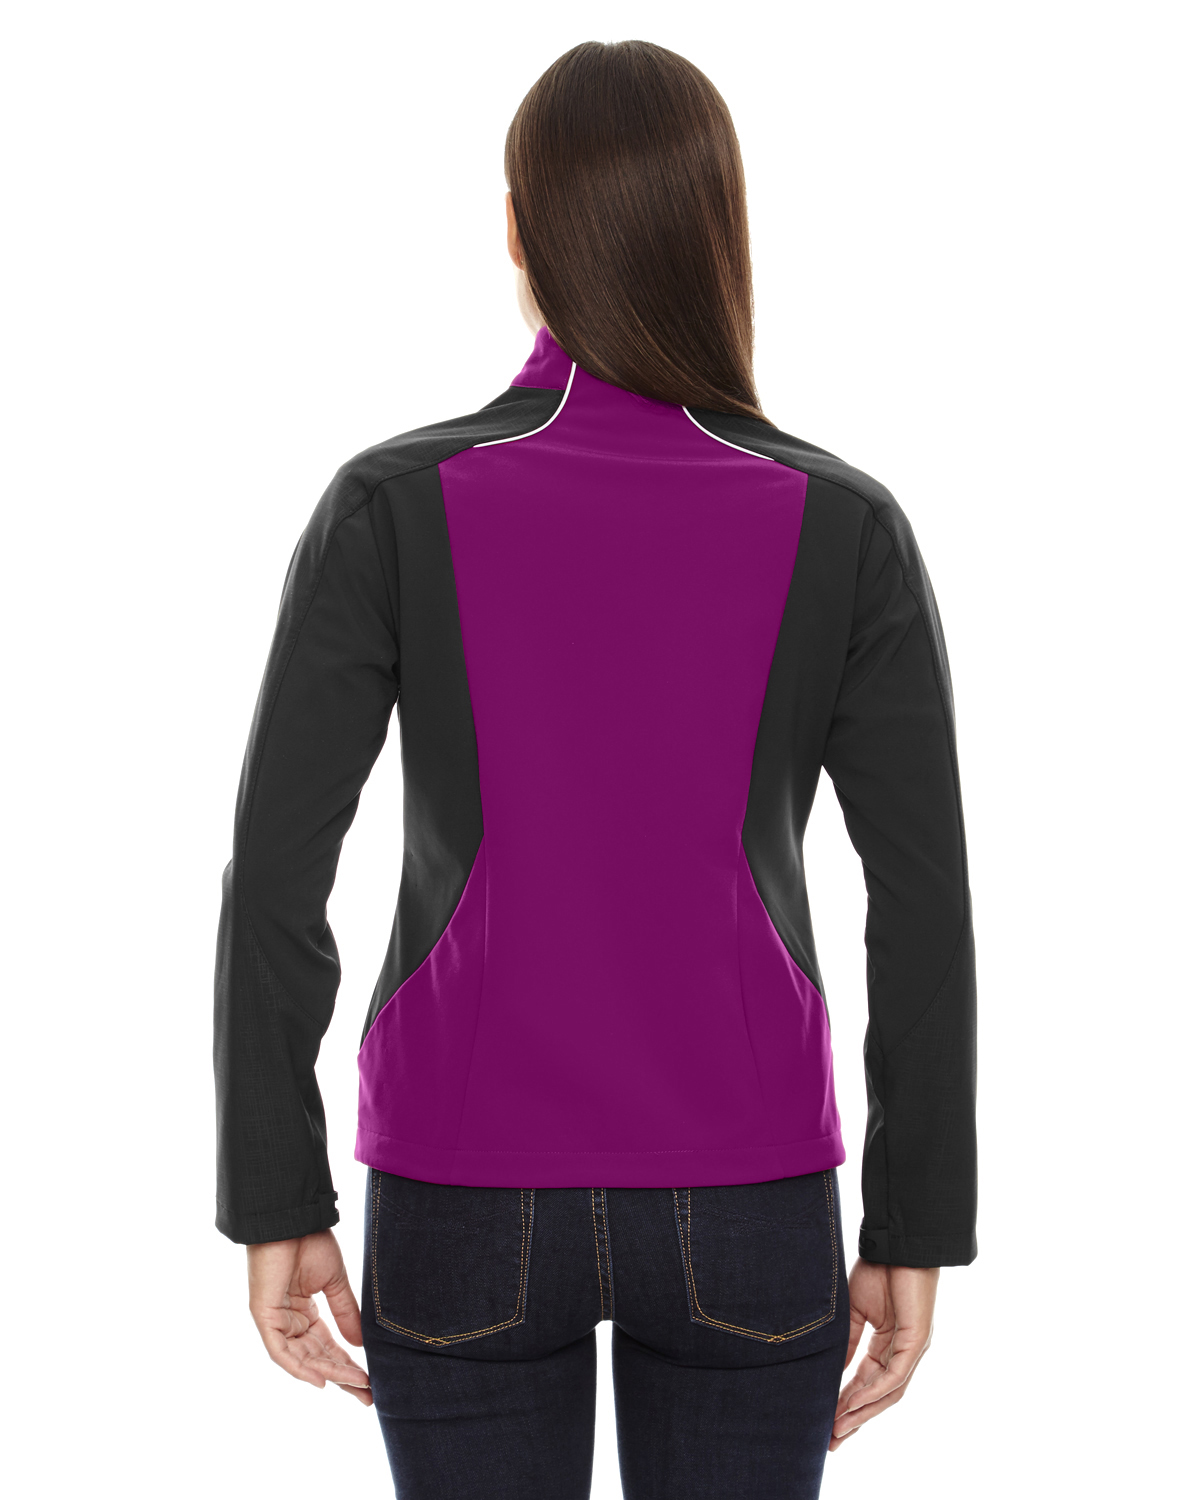 The Ash City - North End Ladies' Terrain Colorblock Soft Shell with Embossed Print - RASPBERRY 455 - S - image 2 of 2